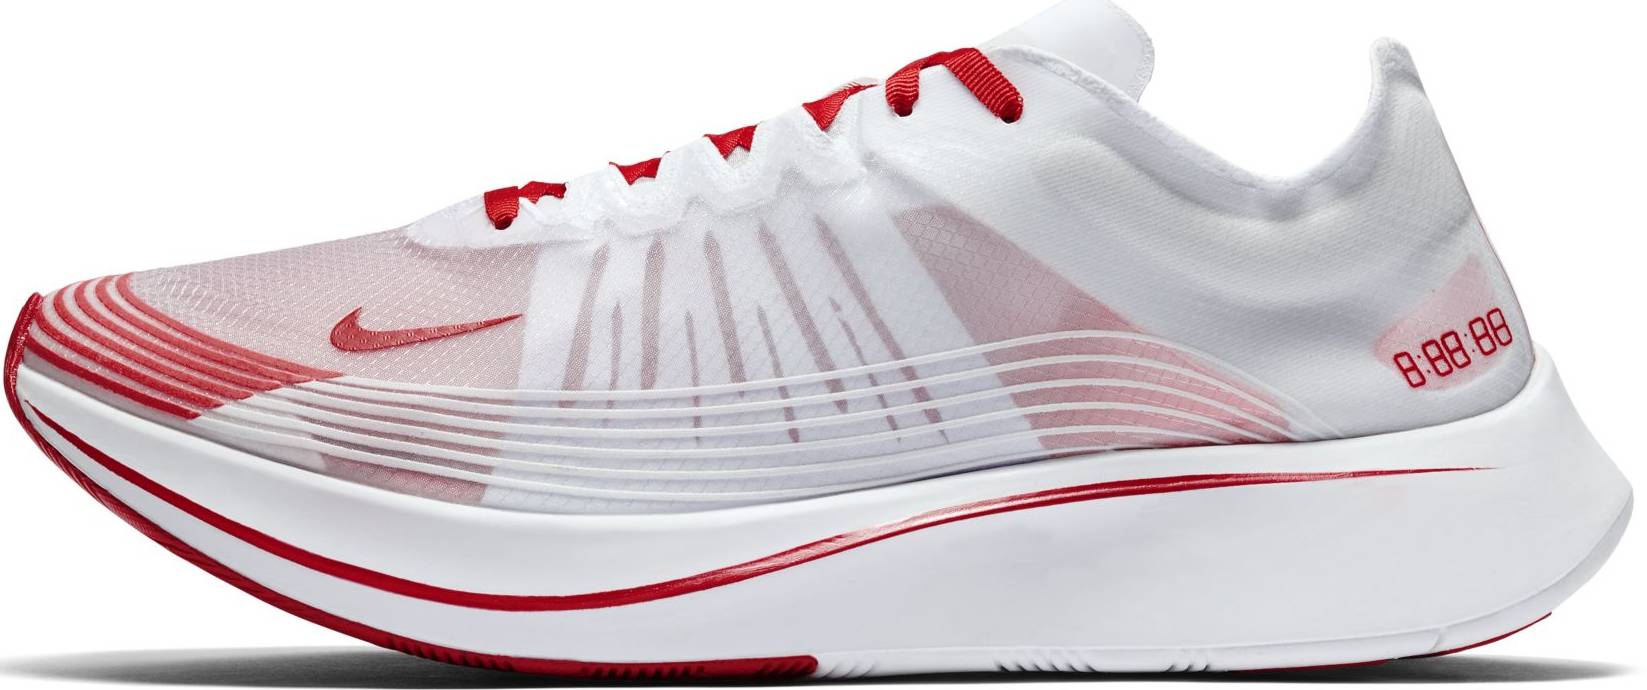 nike zoom fly sp running shoes